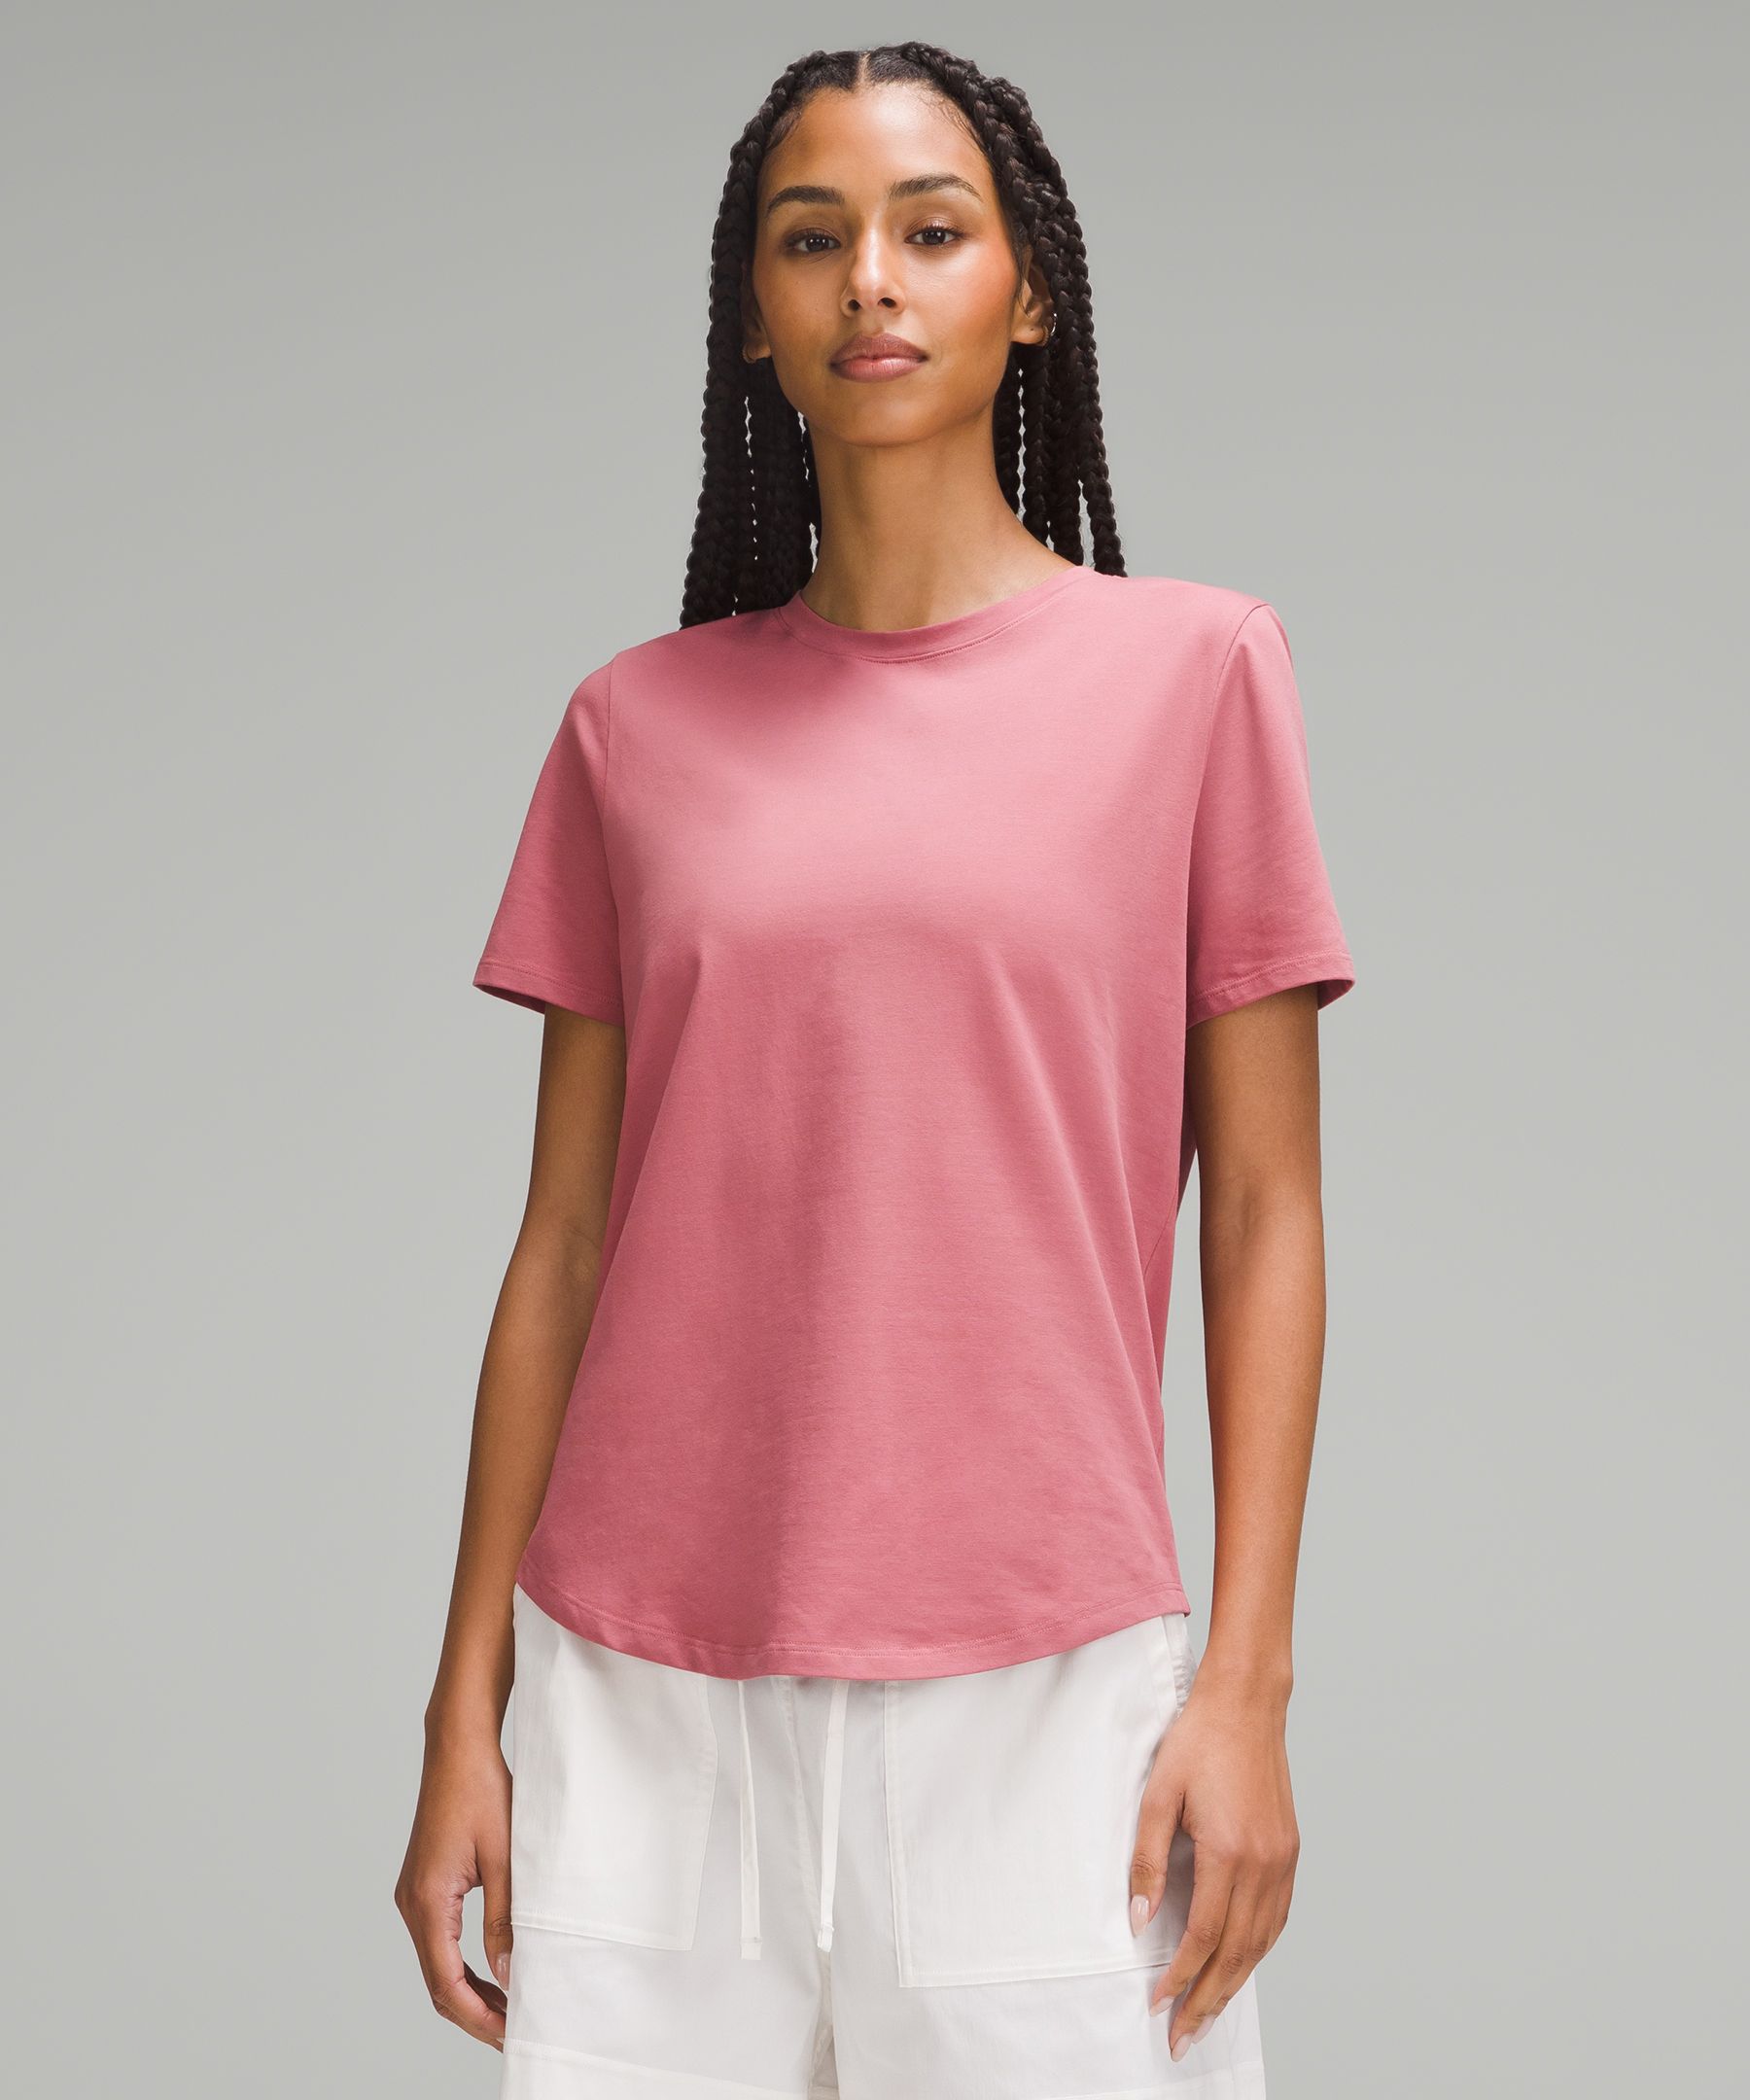 Womens Tops  Shirts & Tops for Women – Nomad the Label